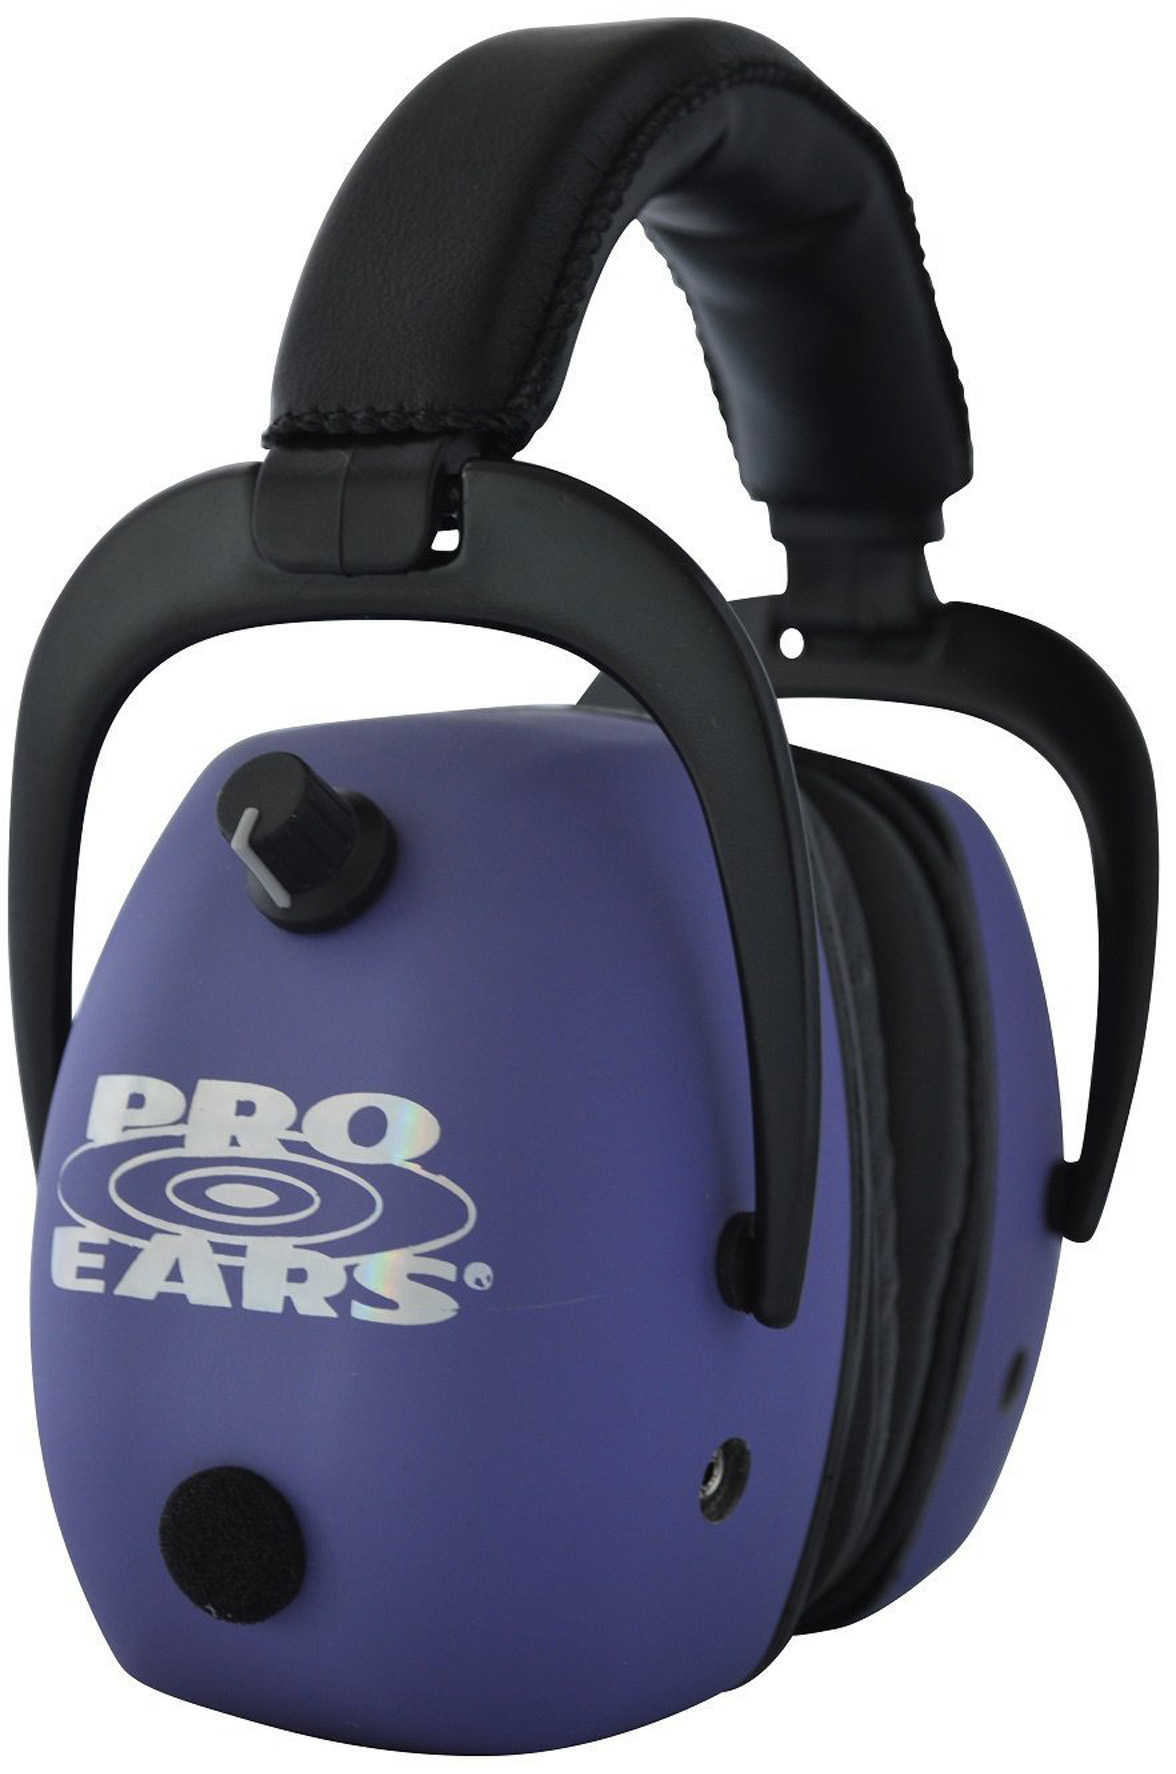 Pro Ears Mag Gold Noise Reduction Rating 30dB Purple Md: GSDPMPU